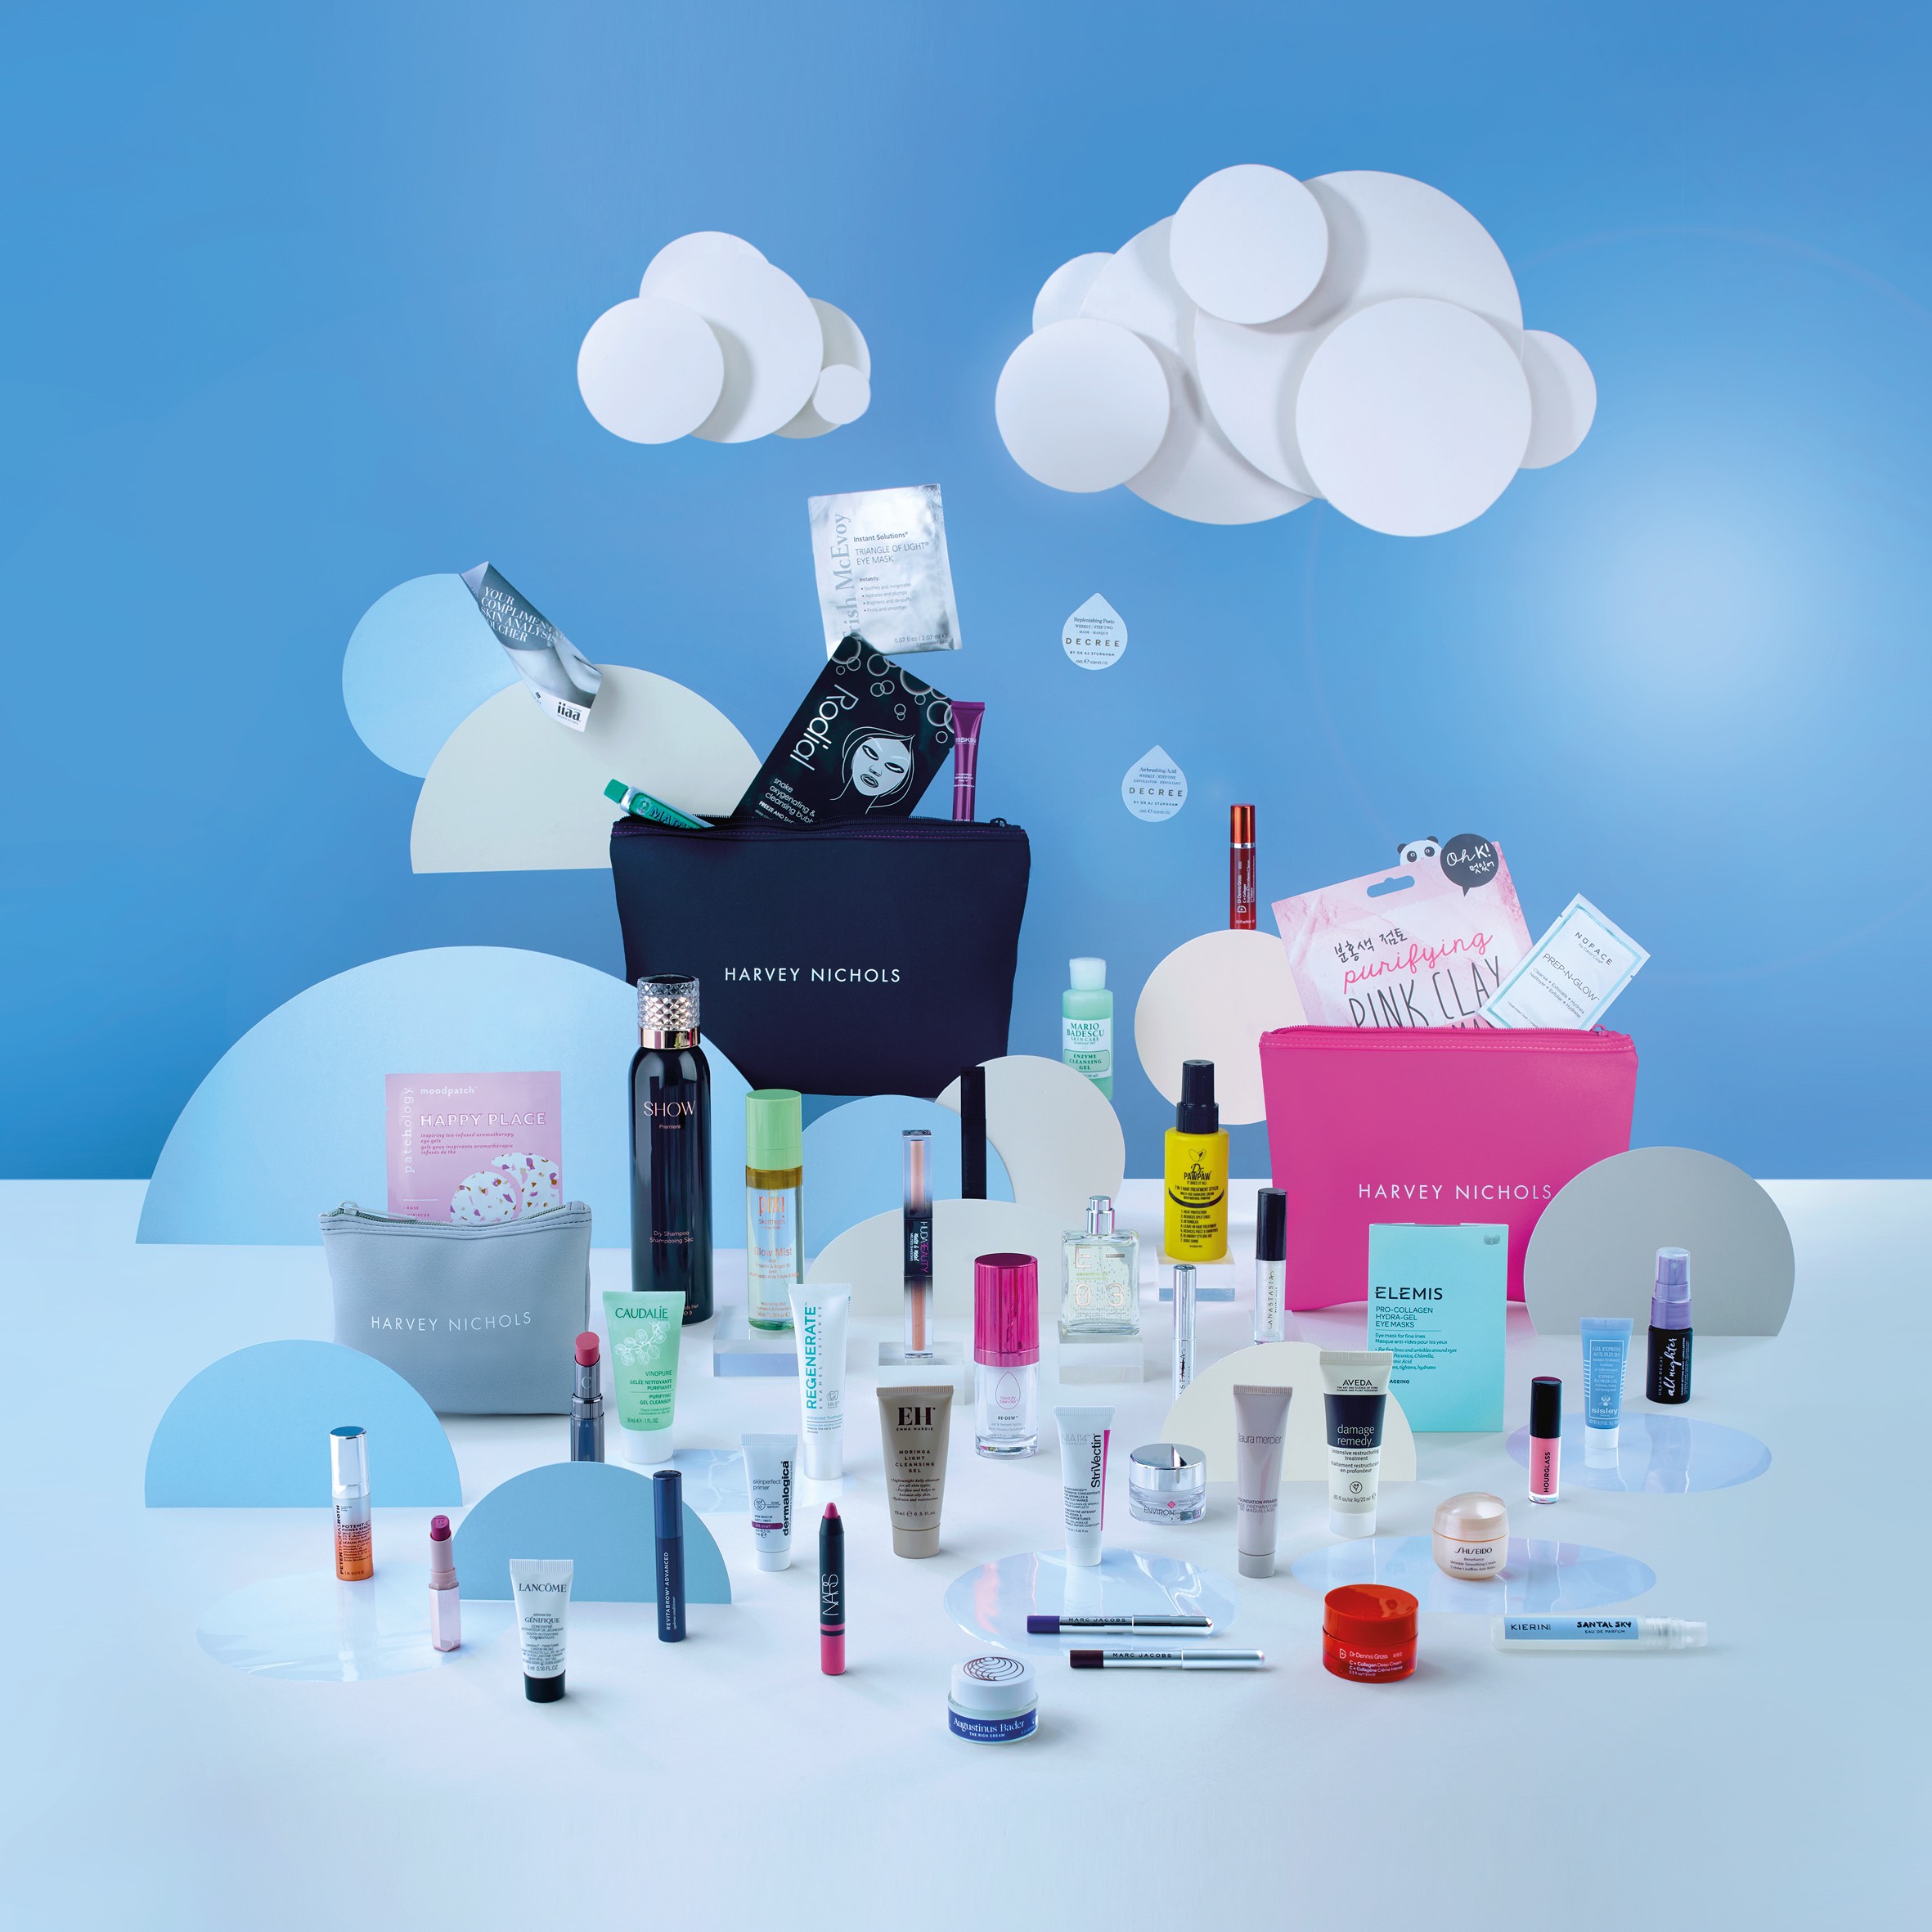 Harvey Nichols Aw19 Beauty Bumper Gift With Purchase Beauty Bible